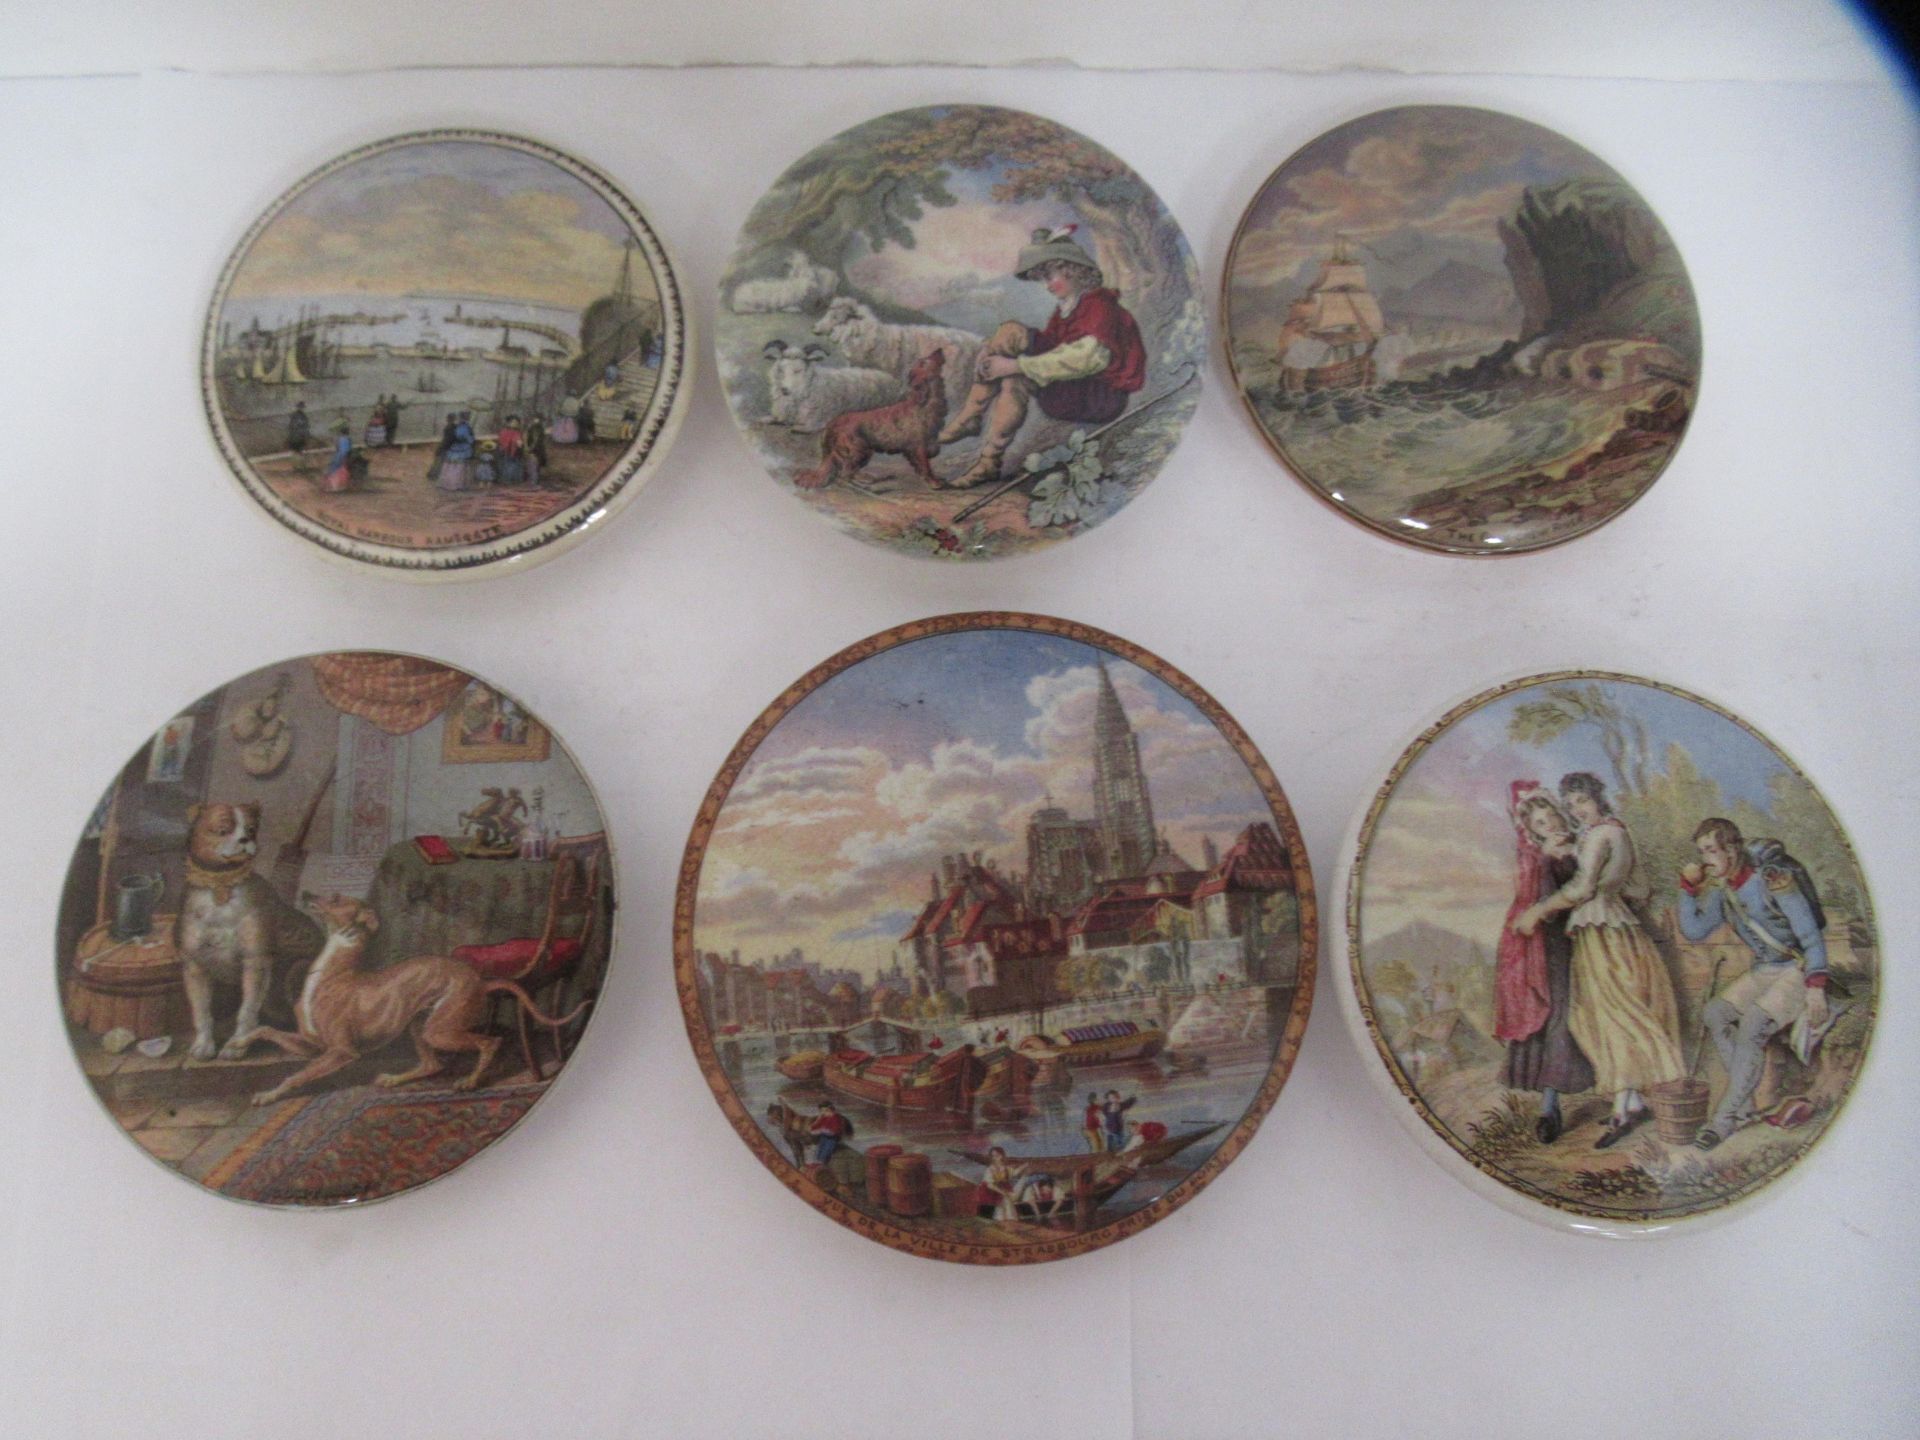 6x Prattware ceramic lids including 'Royal Harbour Ramsgate', 'The Chin-Chew River', 'Contrast', and